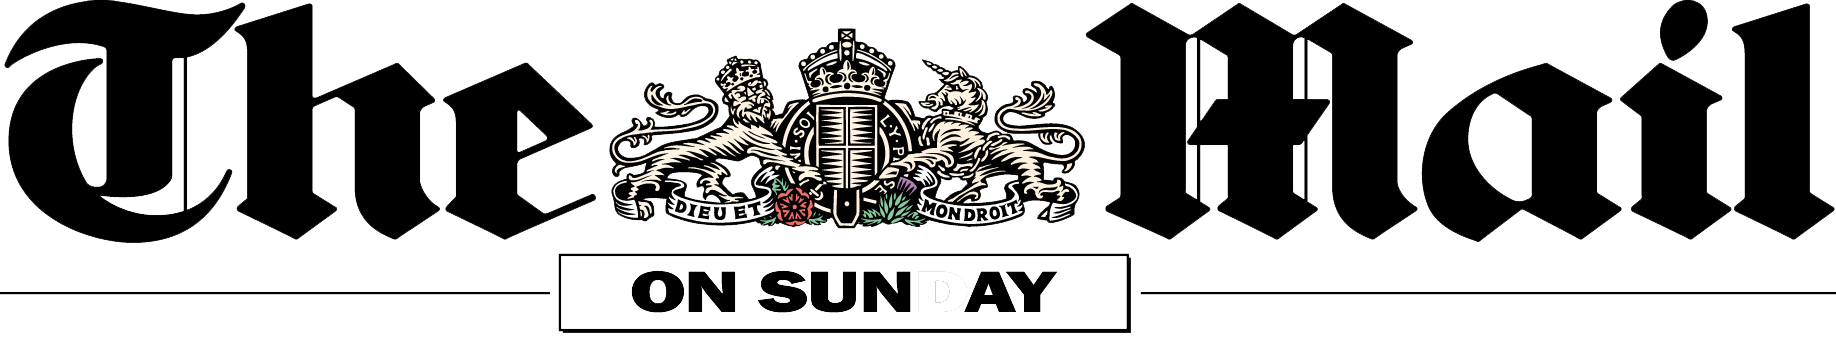 The_mail_on_sunday_logo.png